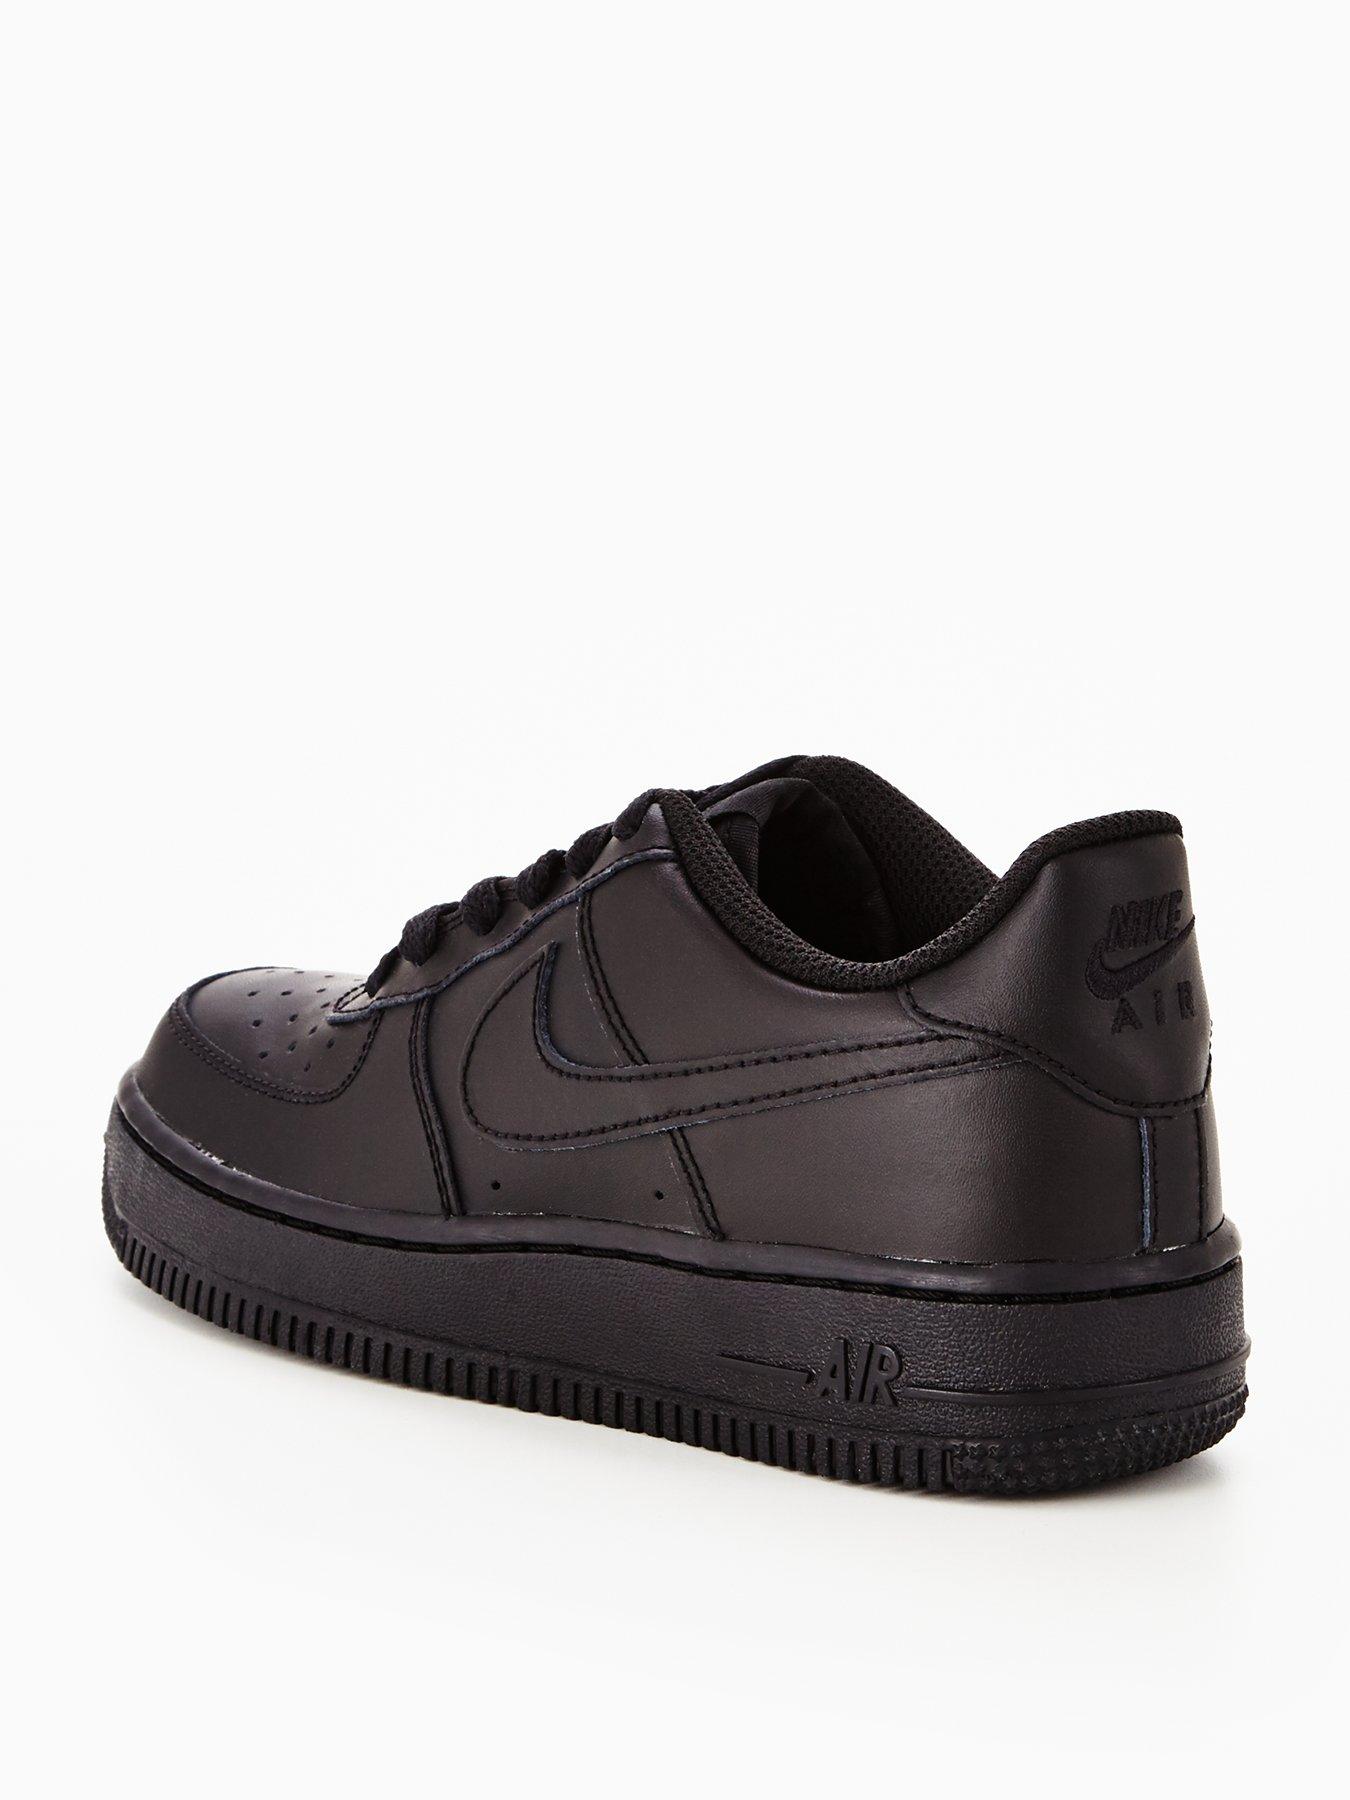 air force 1 childrens trainers - black